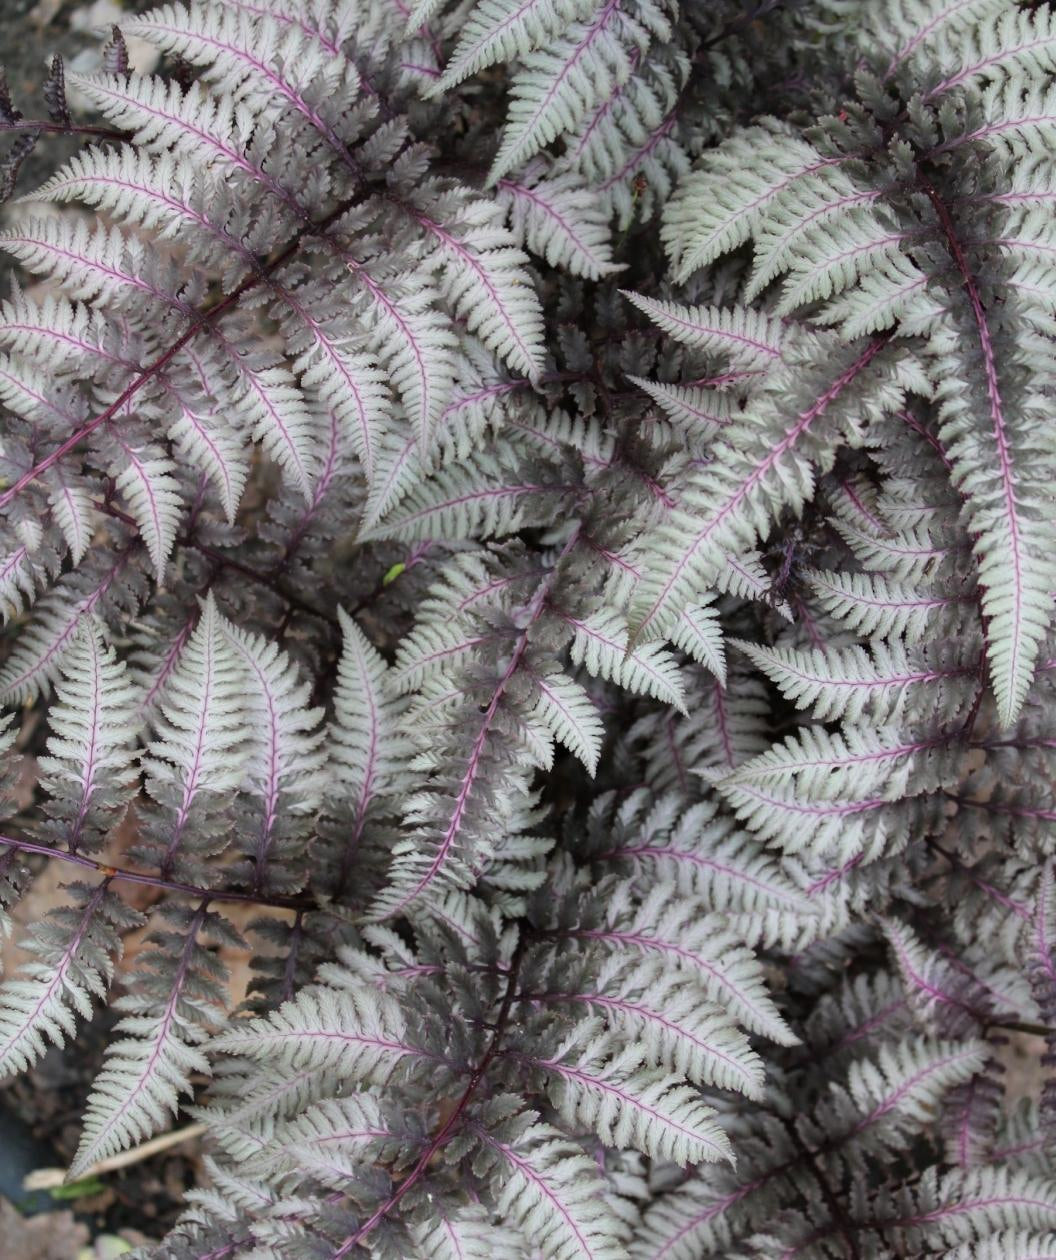 Regal Red Japanese Painted Fern